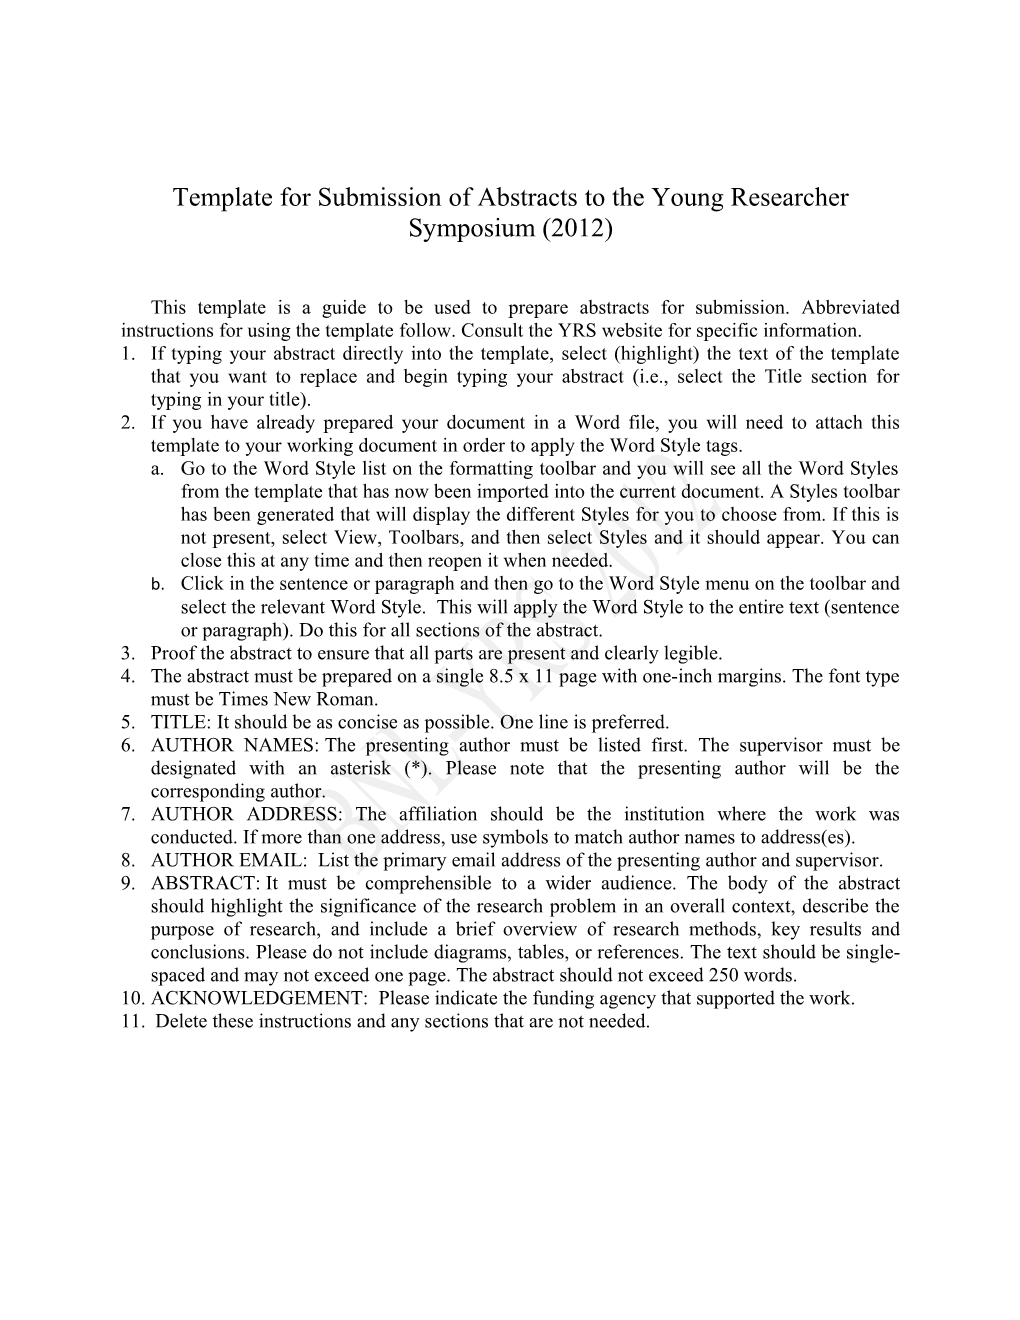 Template for Submission of Abstracts to the Young Researcher Symposium (2012)